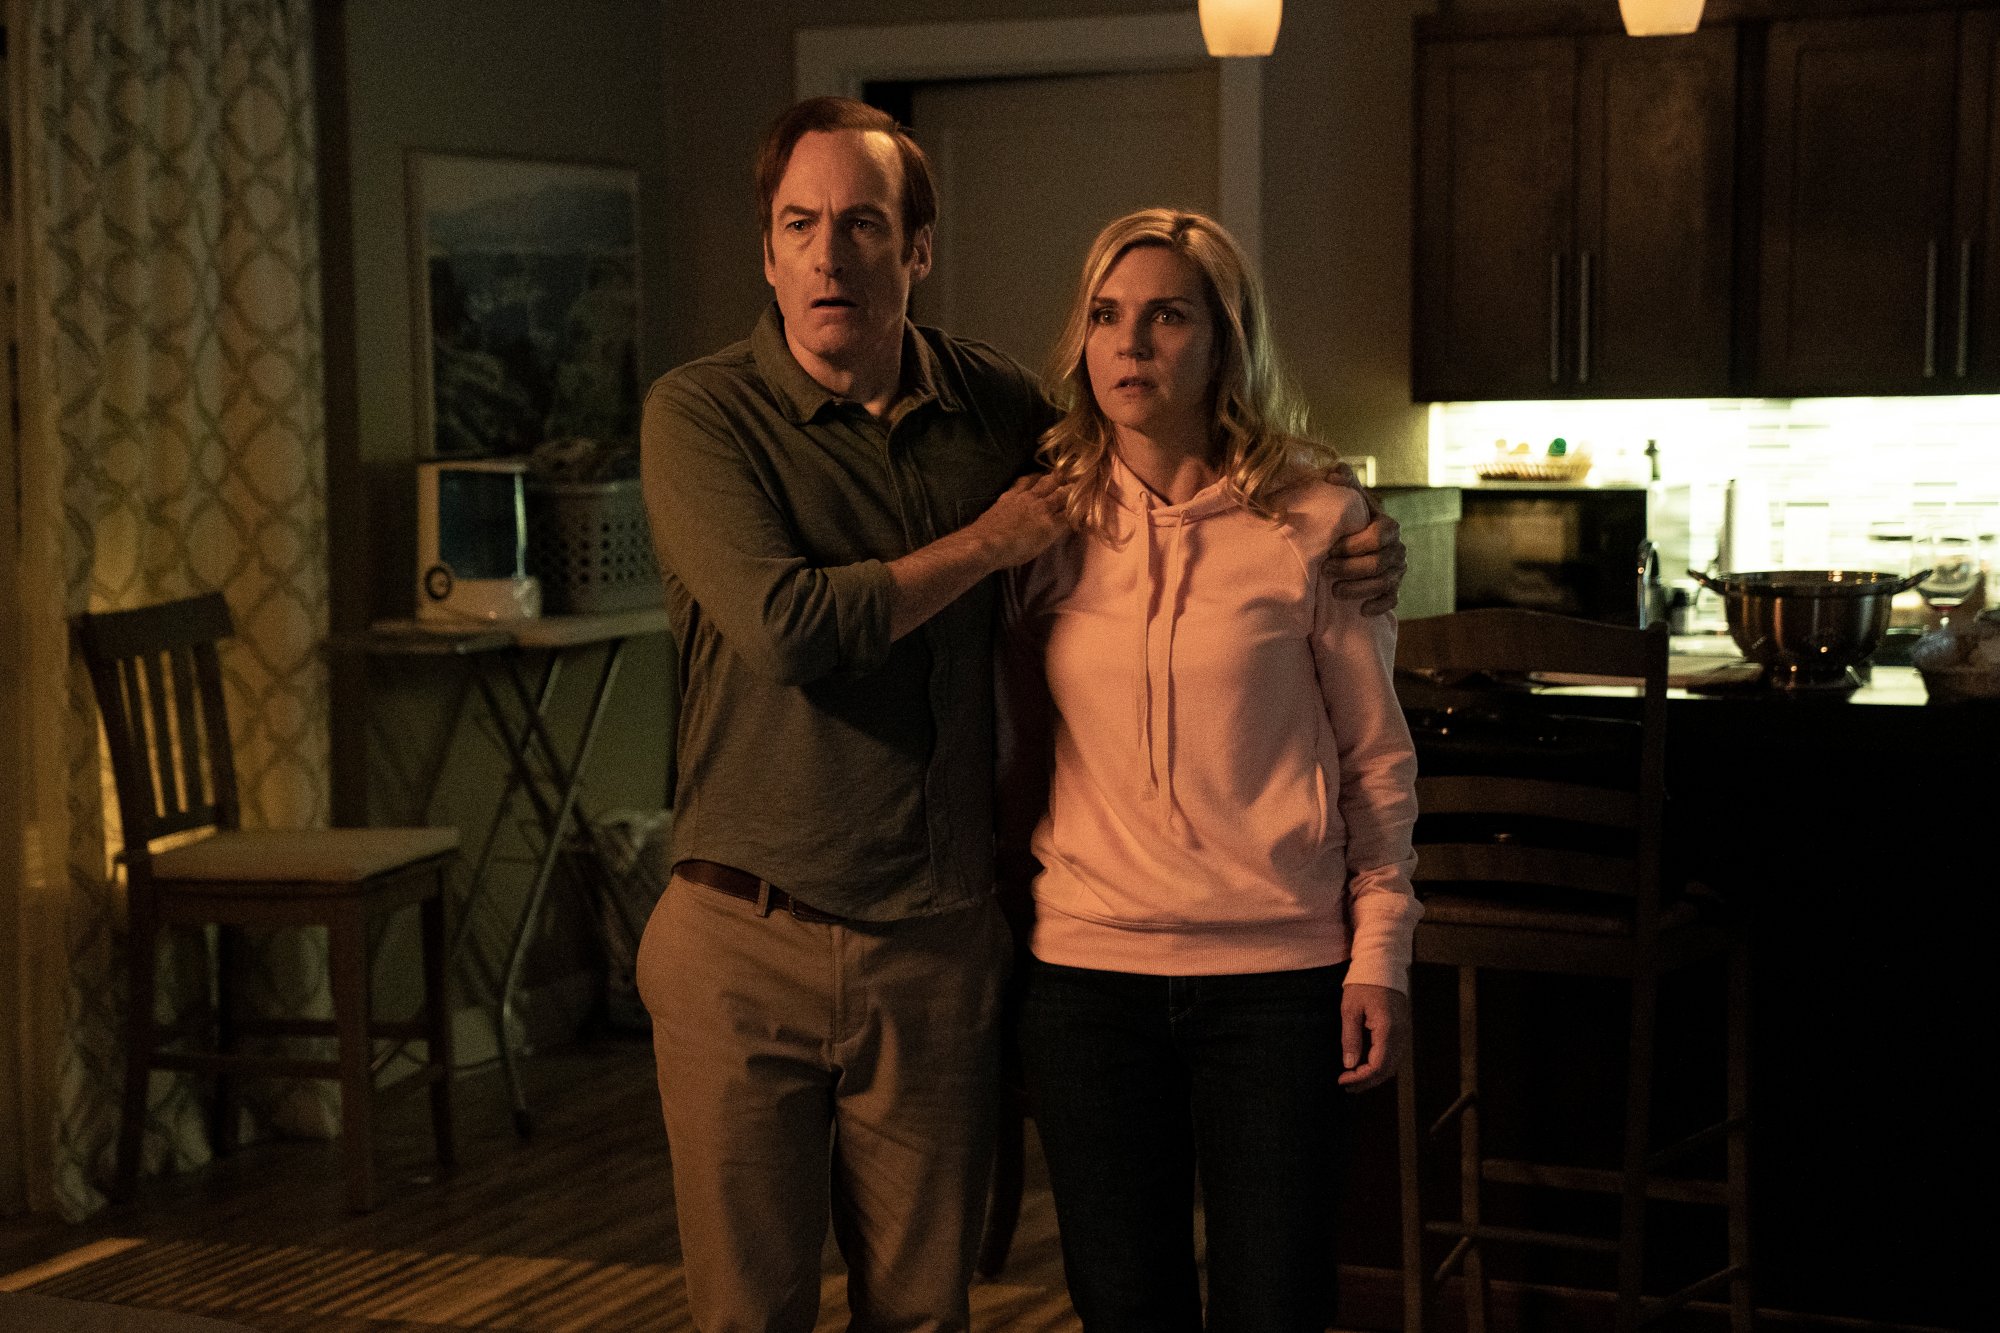 Bob Odenkirk and Rhea Seehorn as Saul Goodman and Kim Wexler in 'Better Call Saul' Season 6 Part 1, which left off on a shocking note heading into part 2. He's wearing a brown shirt and brown pants, and she's wearing a pink sweatshirt. He's holding onto her shoulders, and both characters look scared.